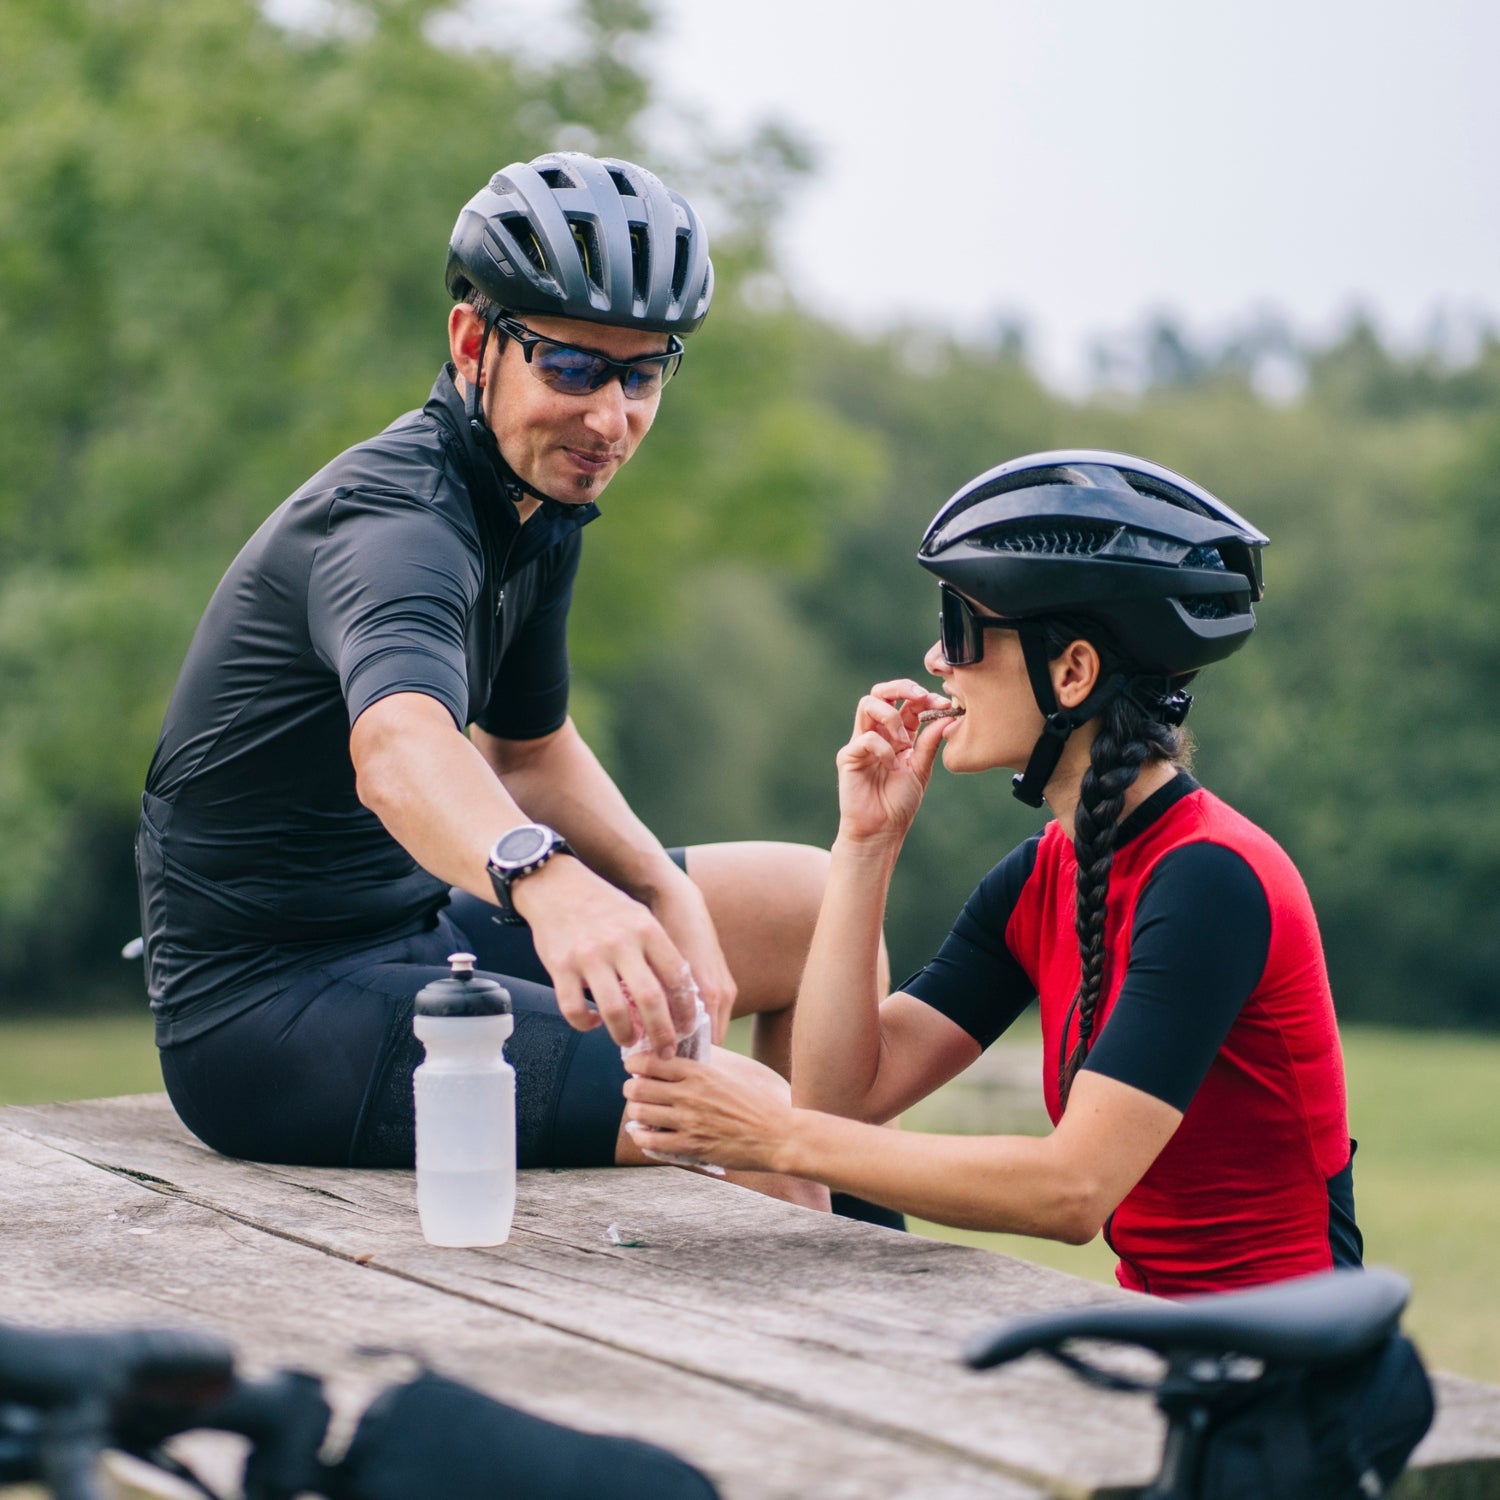 4 Surprising New Insights on Fueling for Endurance Sports